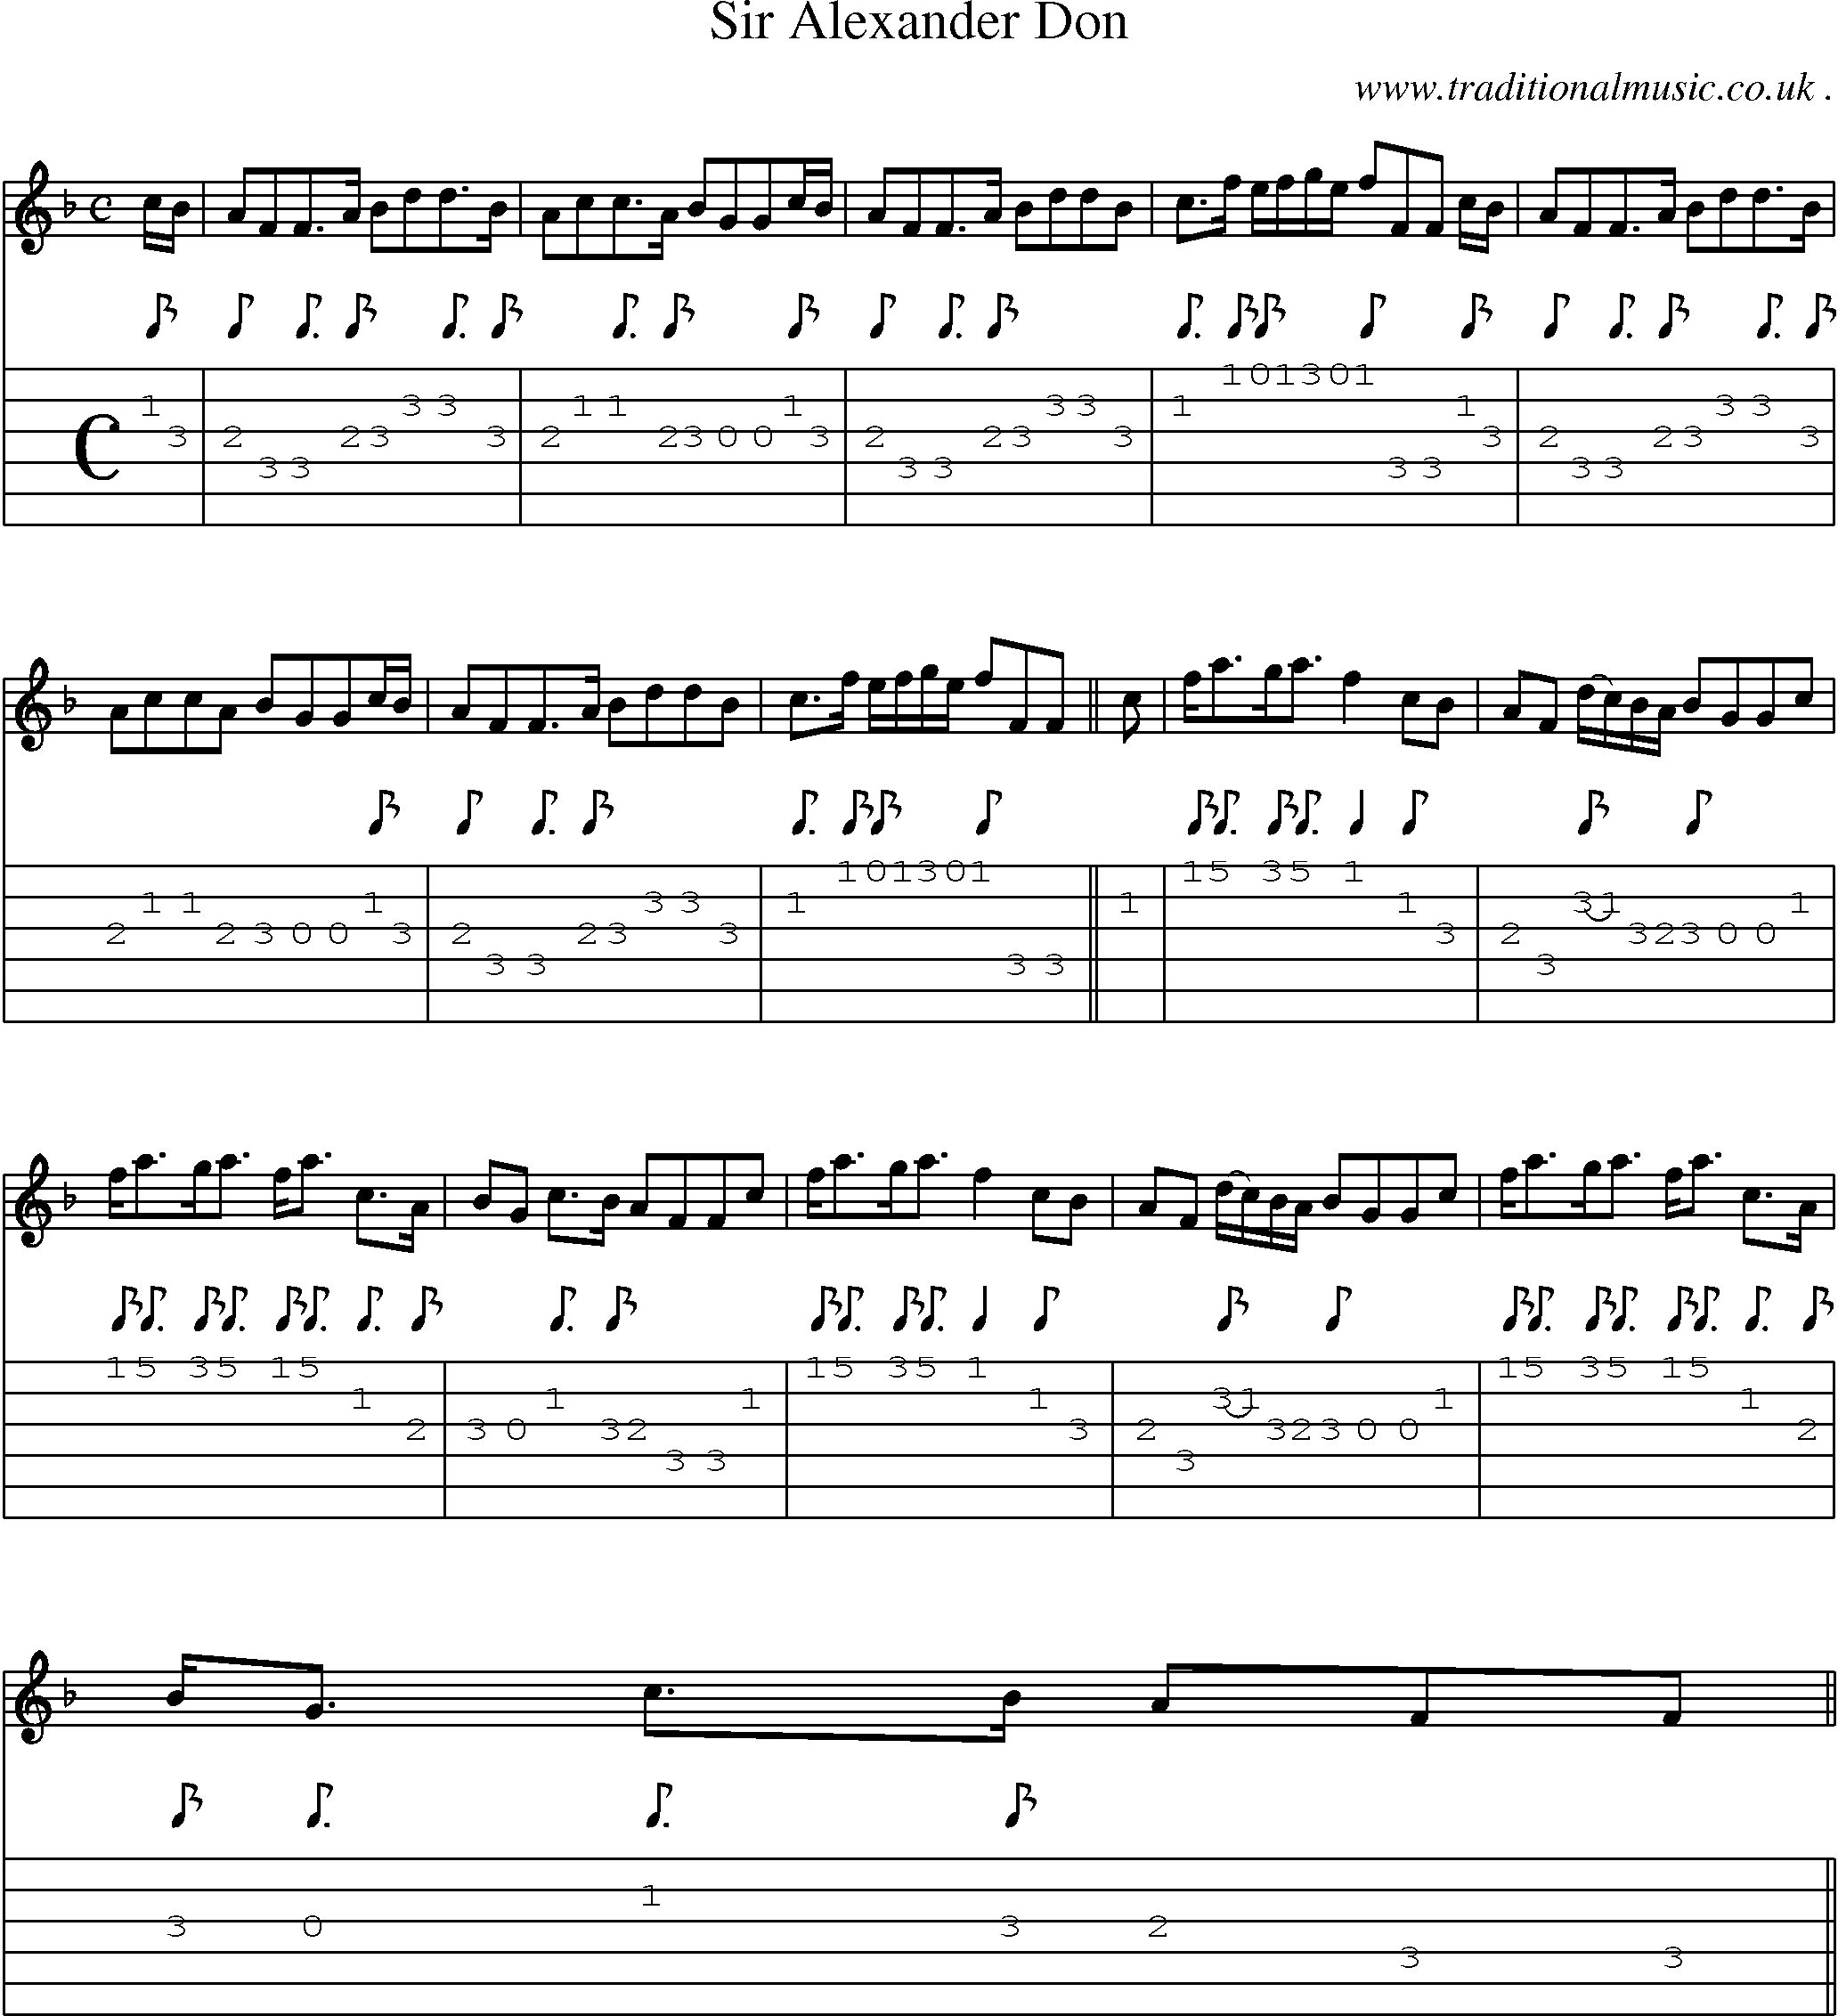 Sheet-music  score, Chords and Guitar Tabs for Sir Alexander Don